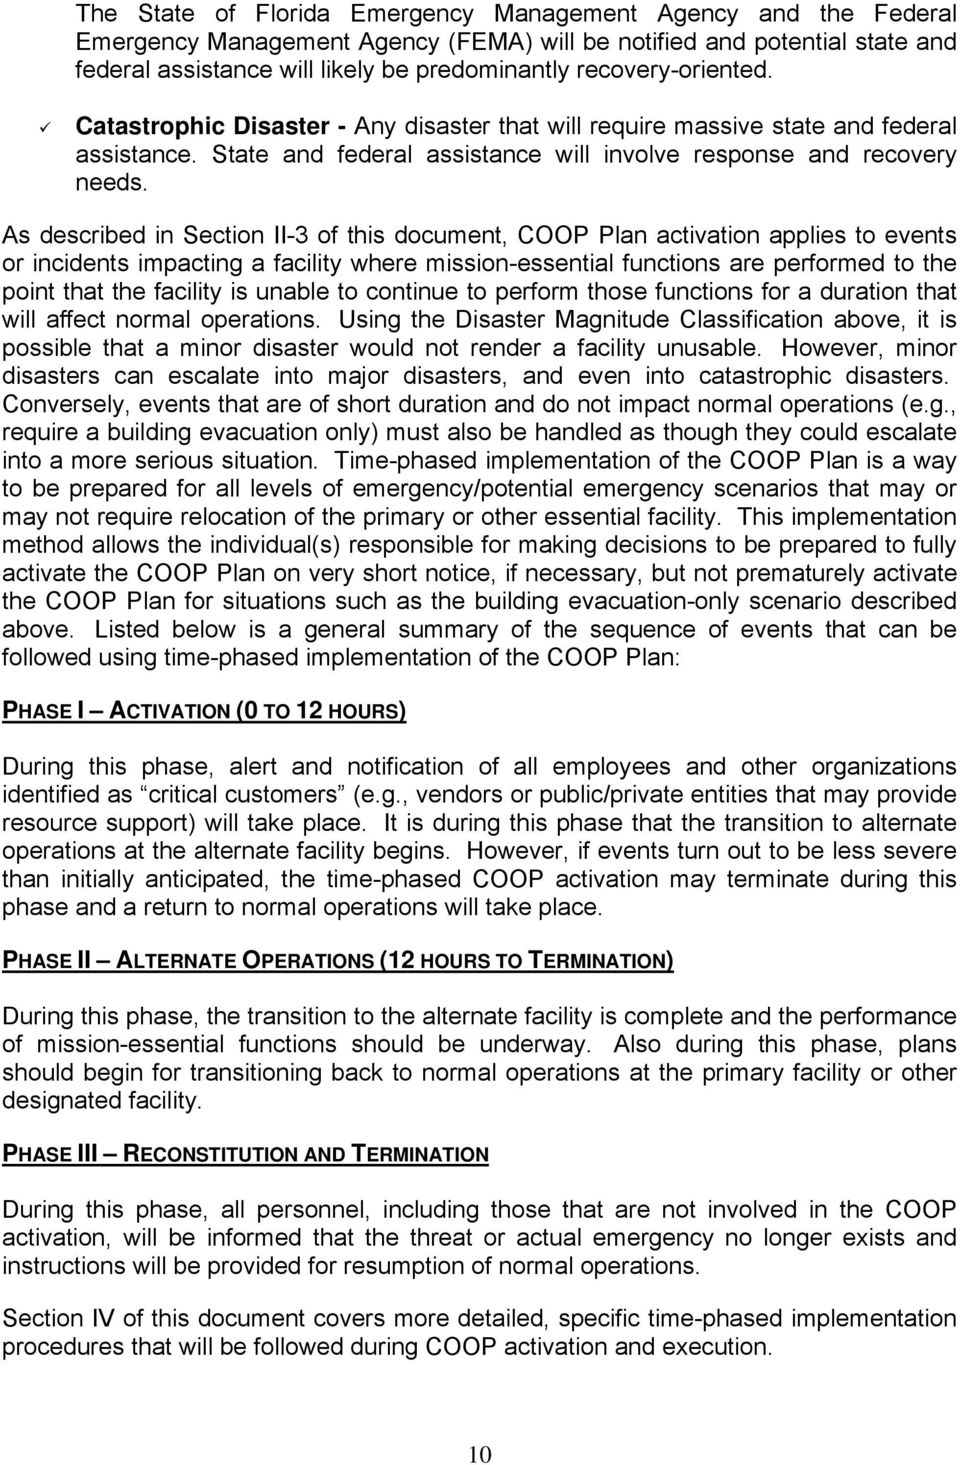 As described in Section II-3 of this document, COOP Plan activation applies to events or incidents impacting a facility where mission-essential functions are performed to the point that the facility